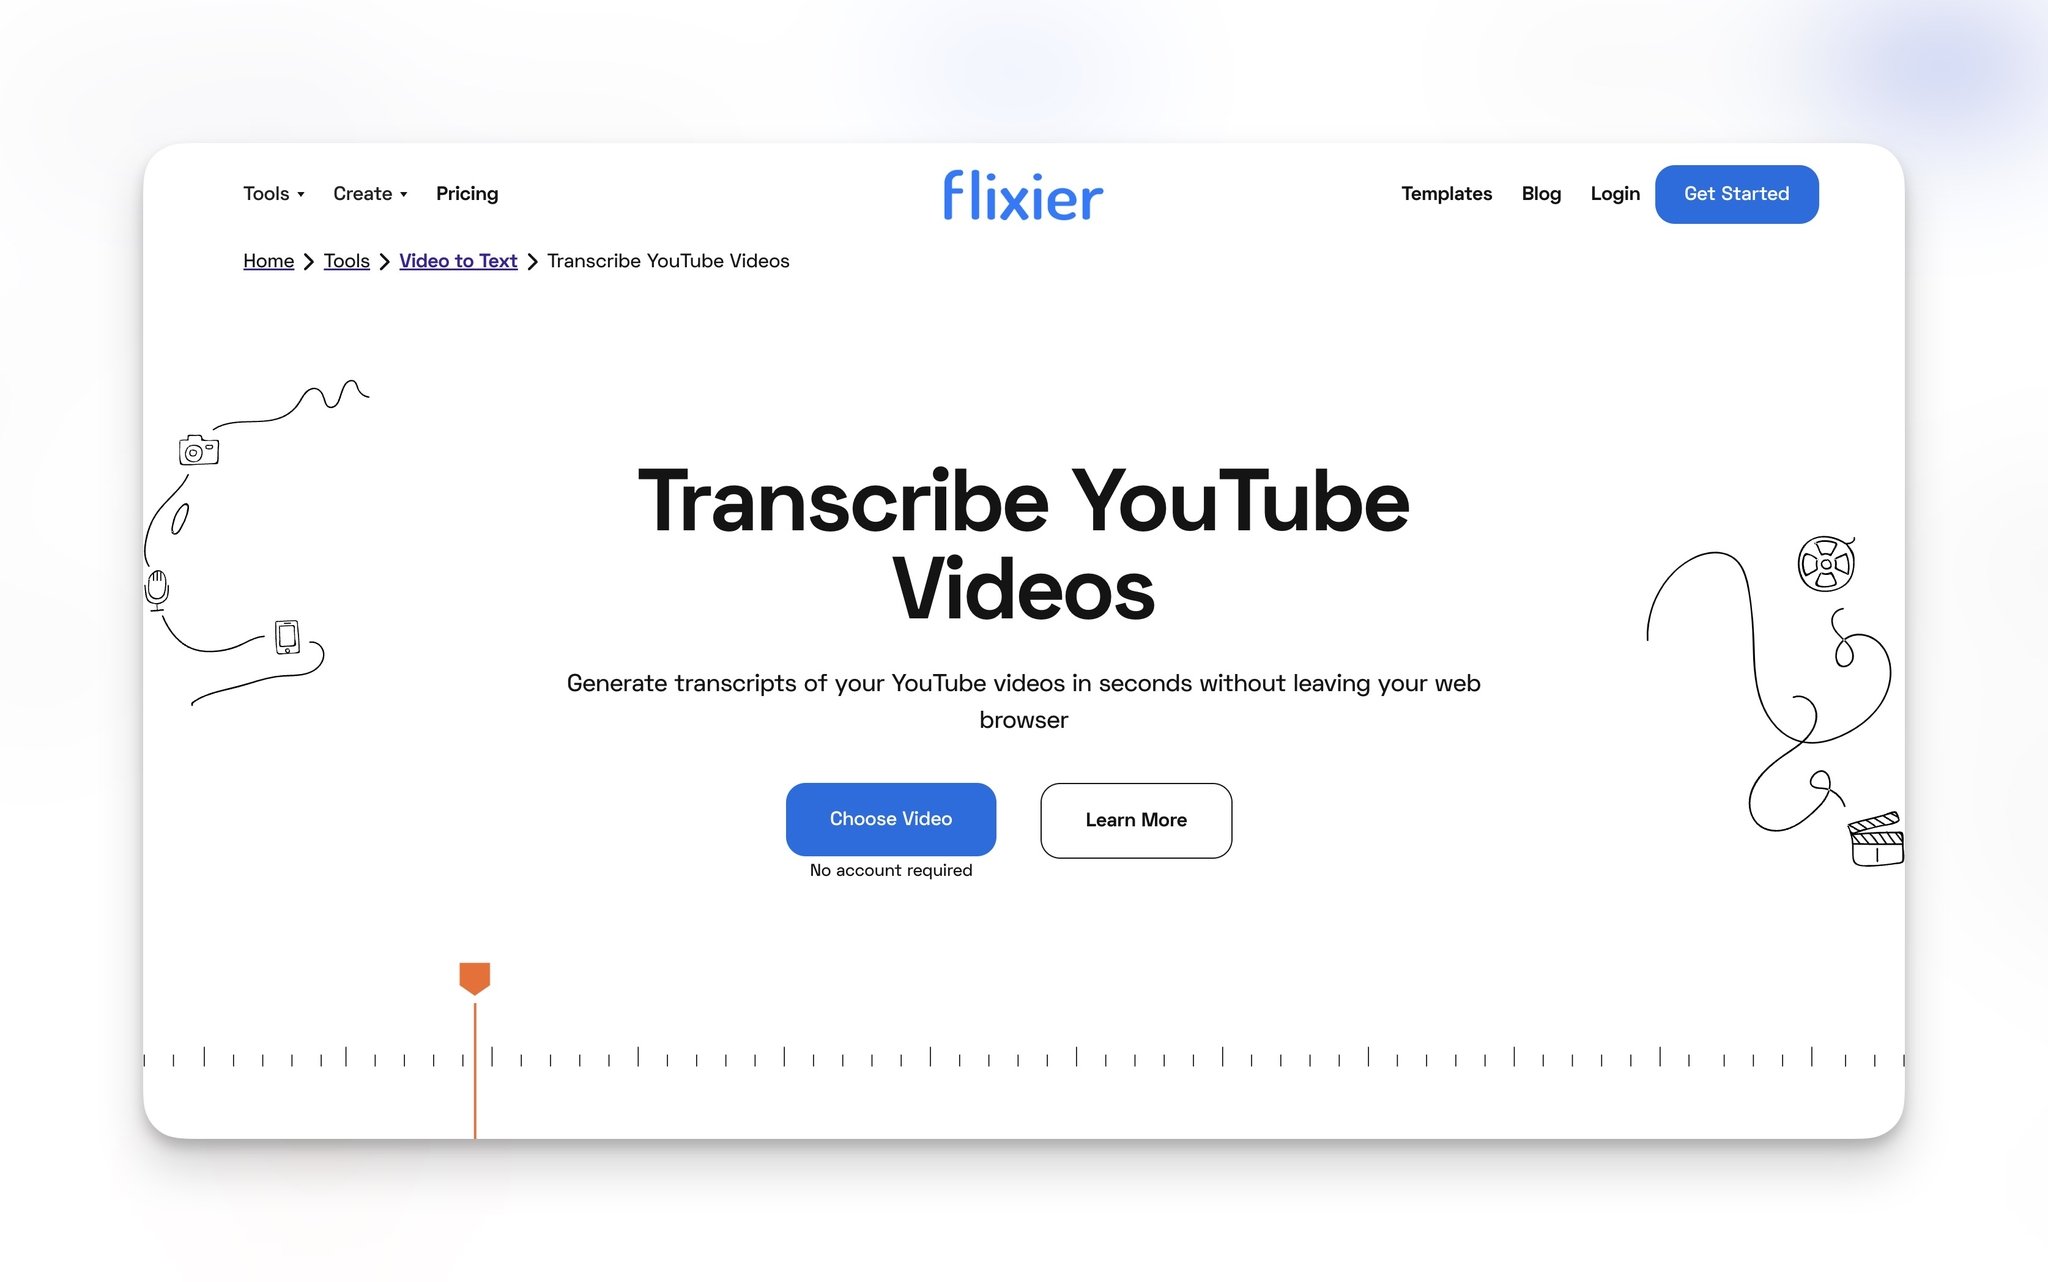 Flixier's homepage with the headline "Transcribe YouTube Videos in the center followed by "Choose Video" and "Learn More" buttons